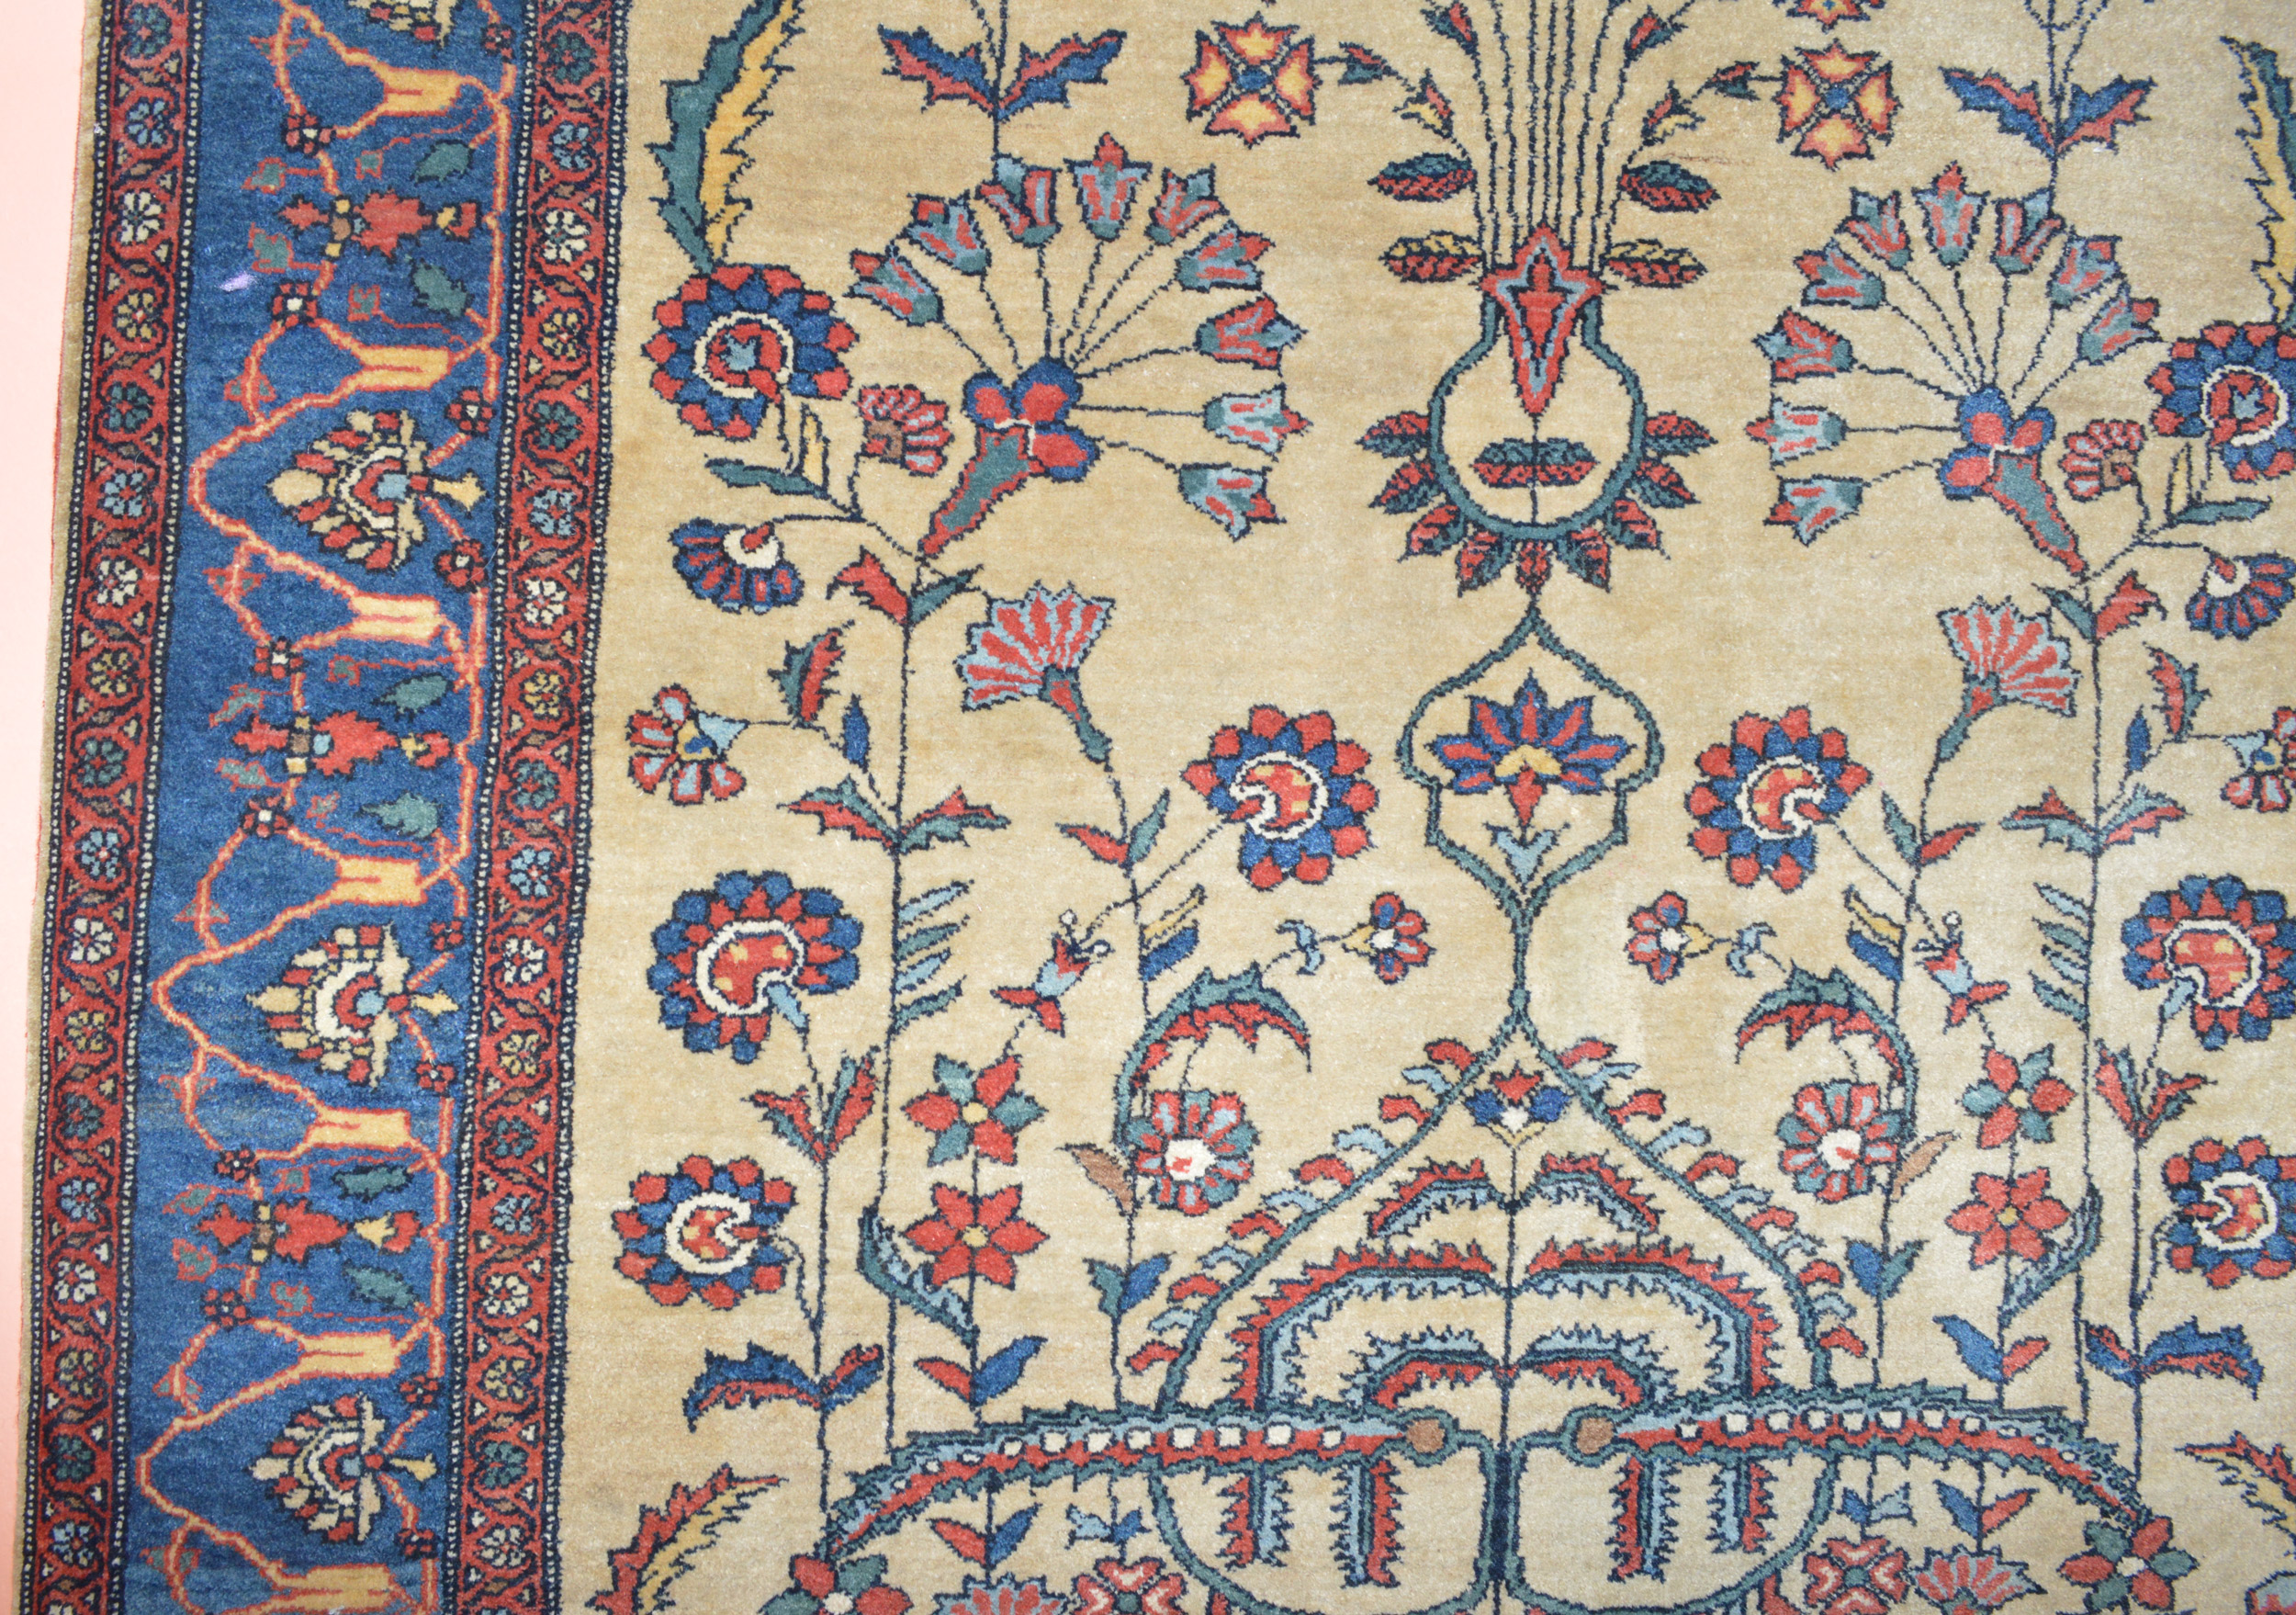 Ivory, floral design field and blue border from an antique Persian Fereghan Sarouk rug, circa 1900 - Douglas Stock Gallery is one of America's most selective dealers in antique Oriental rugs, antique rugs Boston,MA area